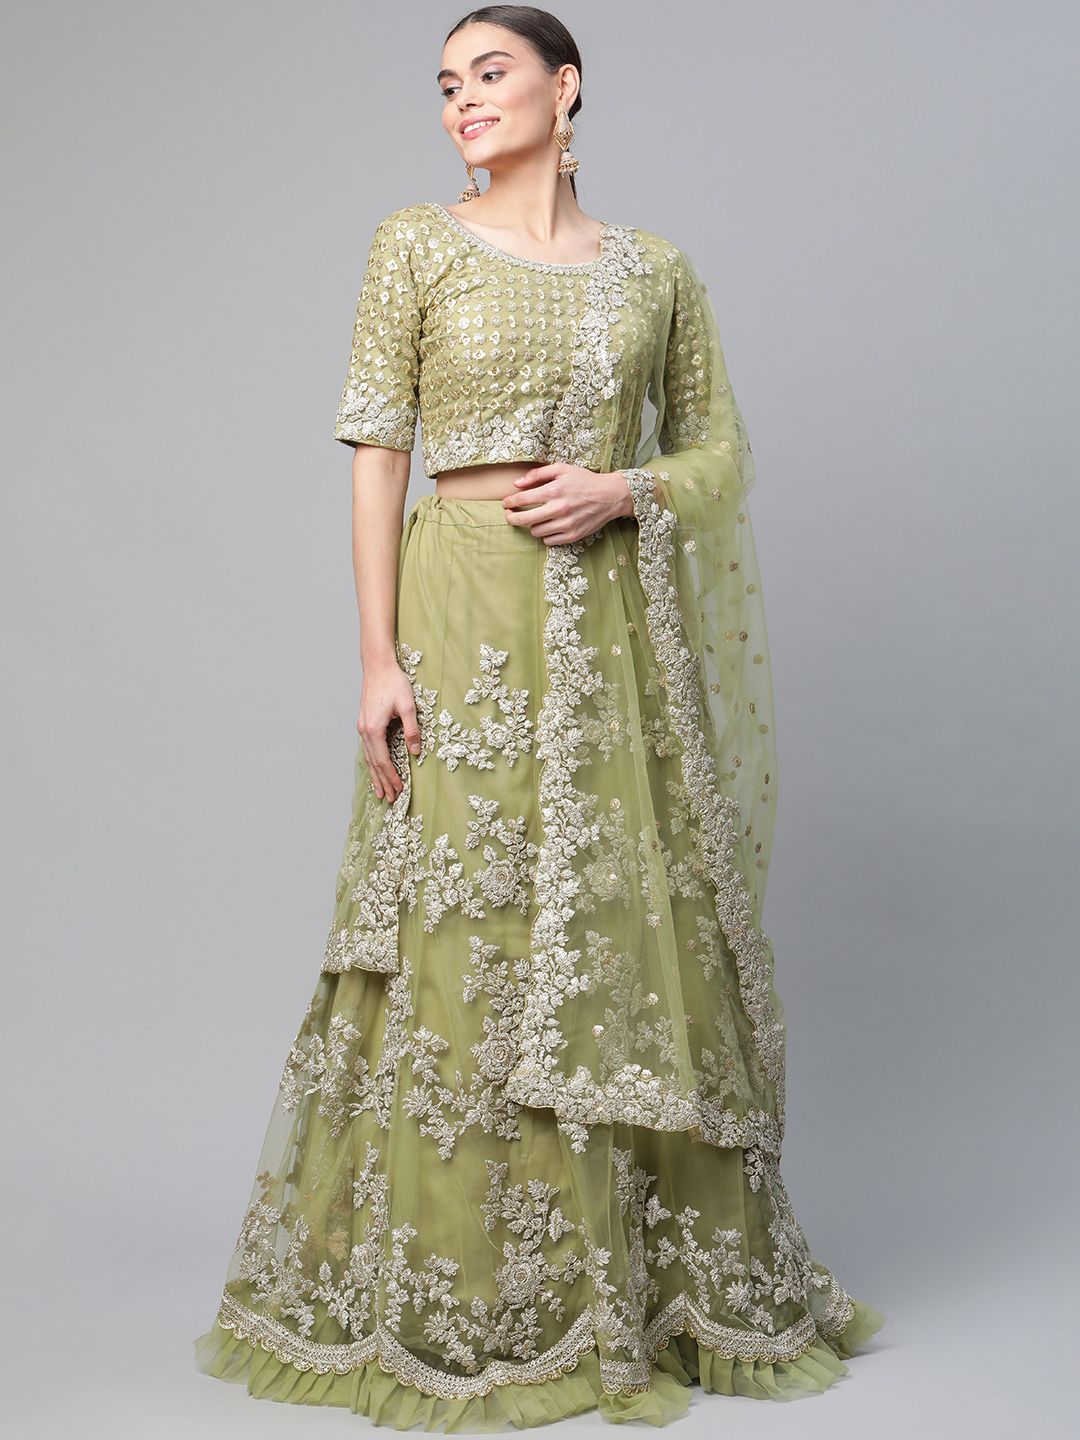 Readiprint Fashions Olive Green Embroidered Sequinned Semi-Stitched Lehenga & Unstitched Blouse With Dupatta Price in India